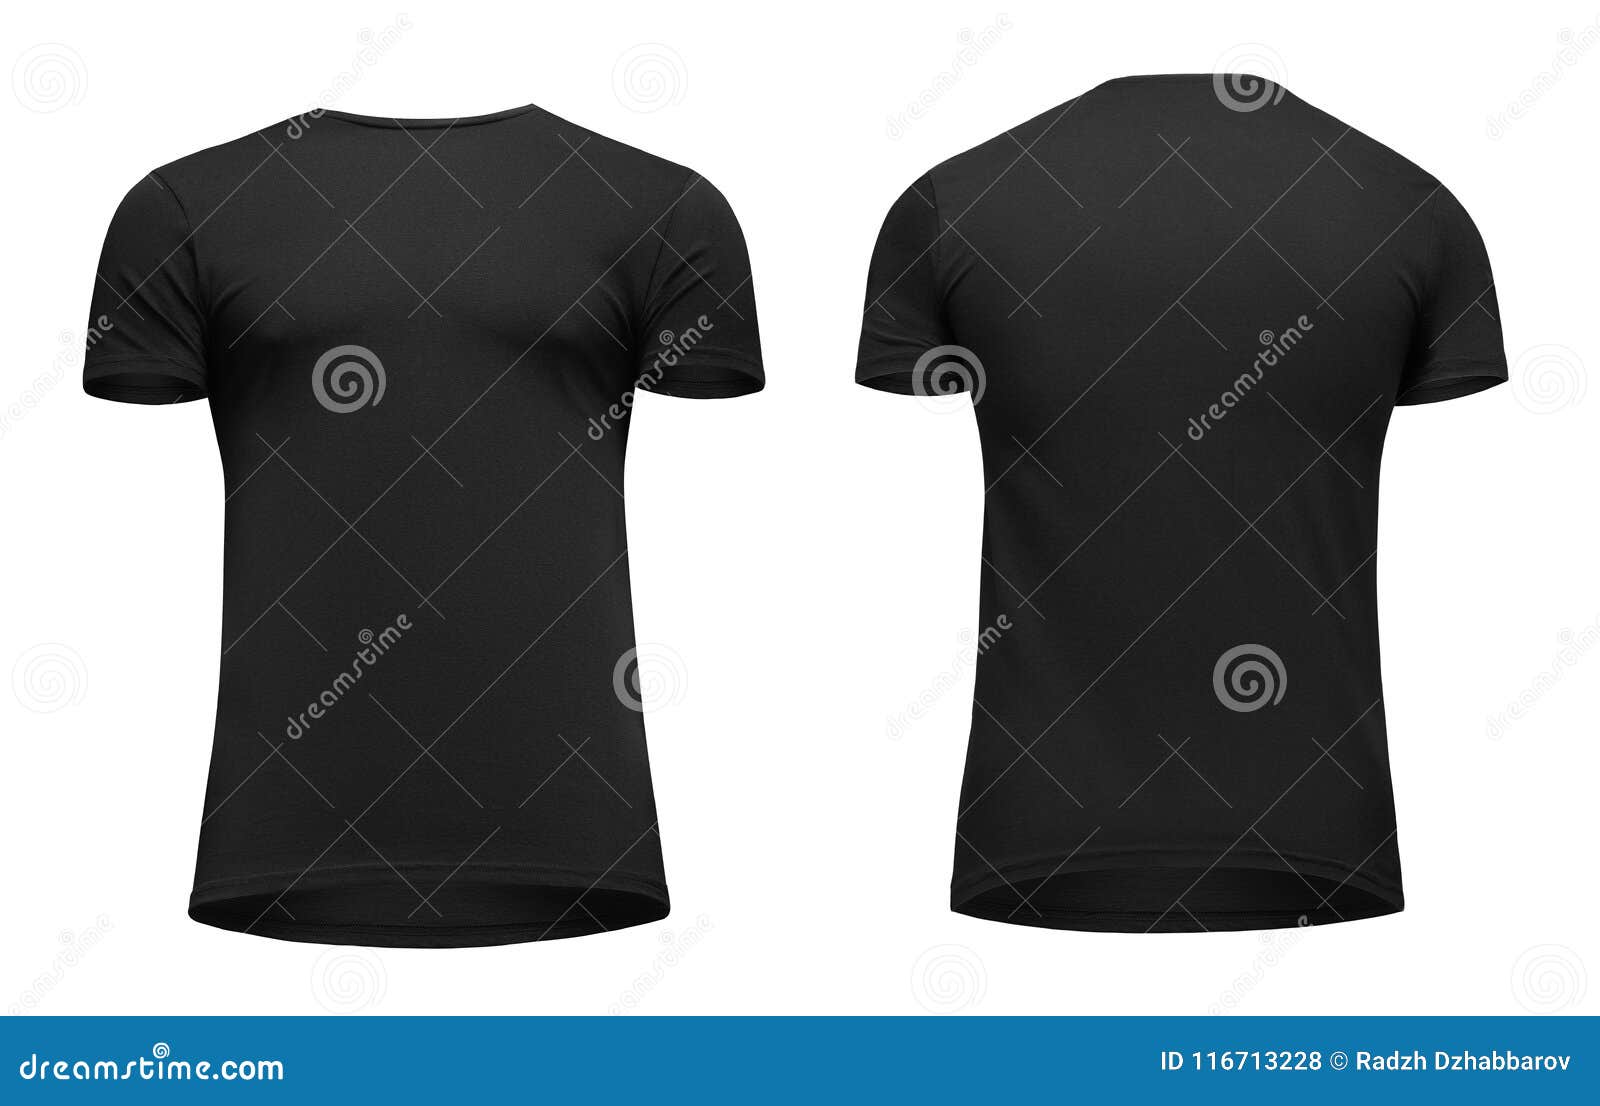 Download Blank Template Men Black T Shirt Short Sleeve, Front And ...